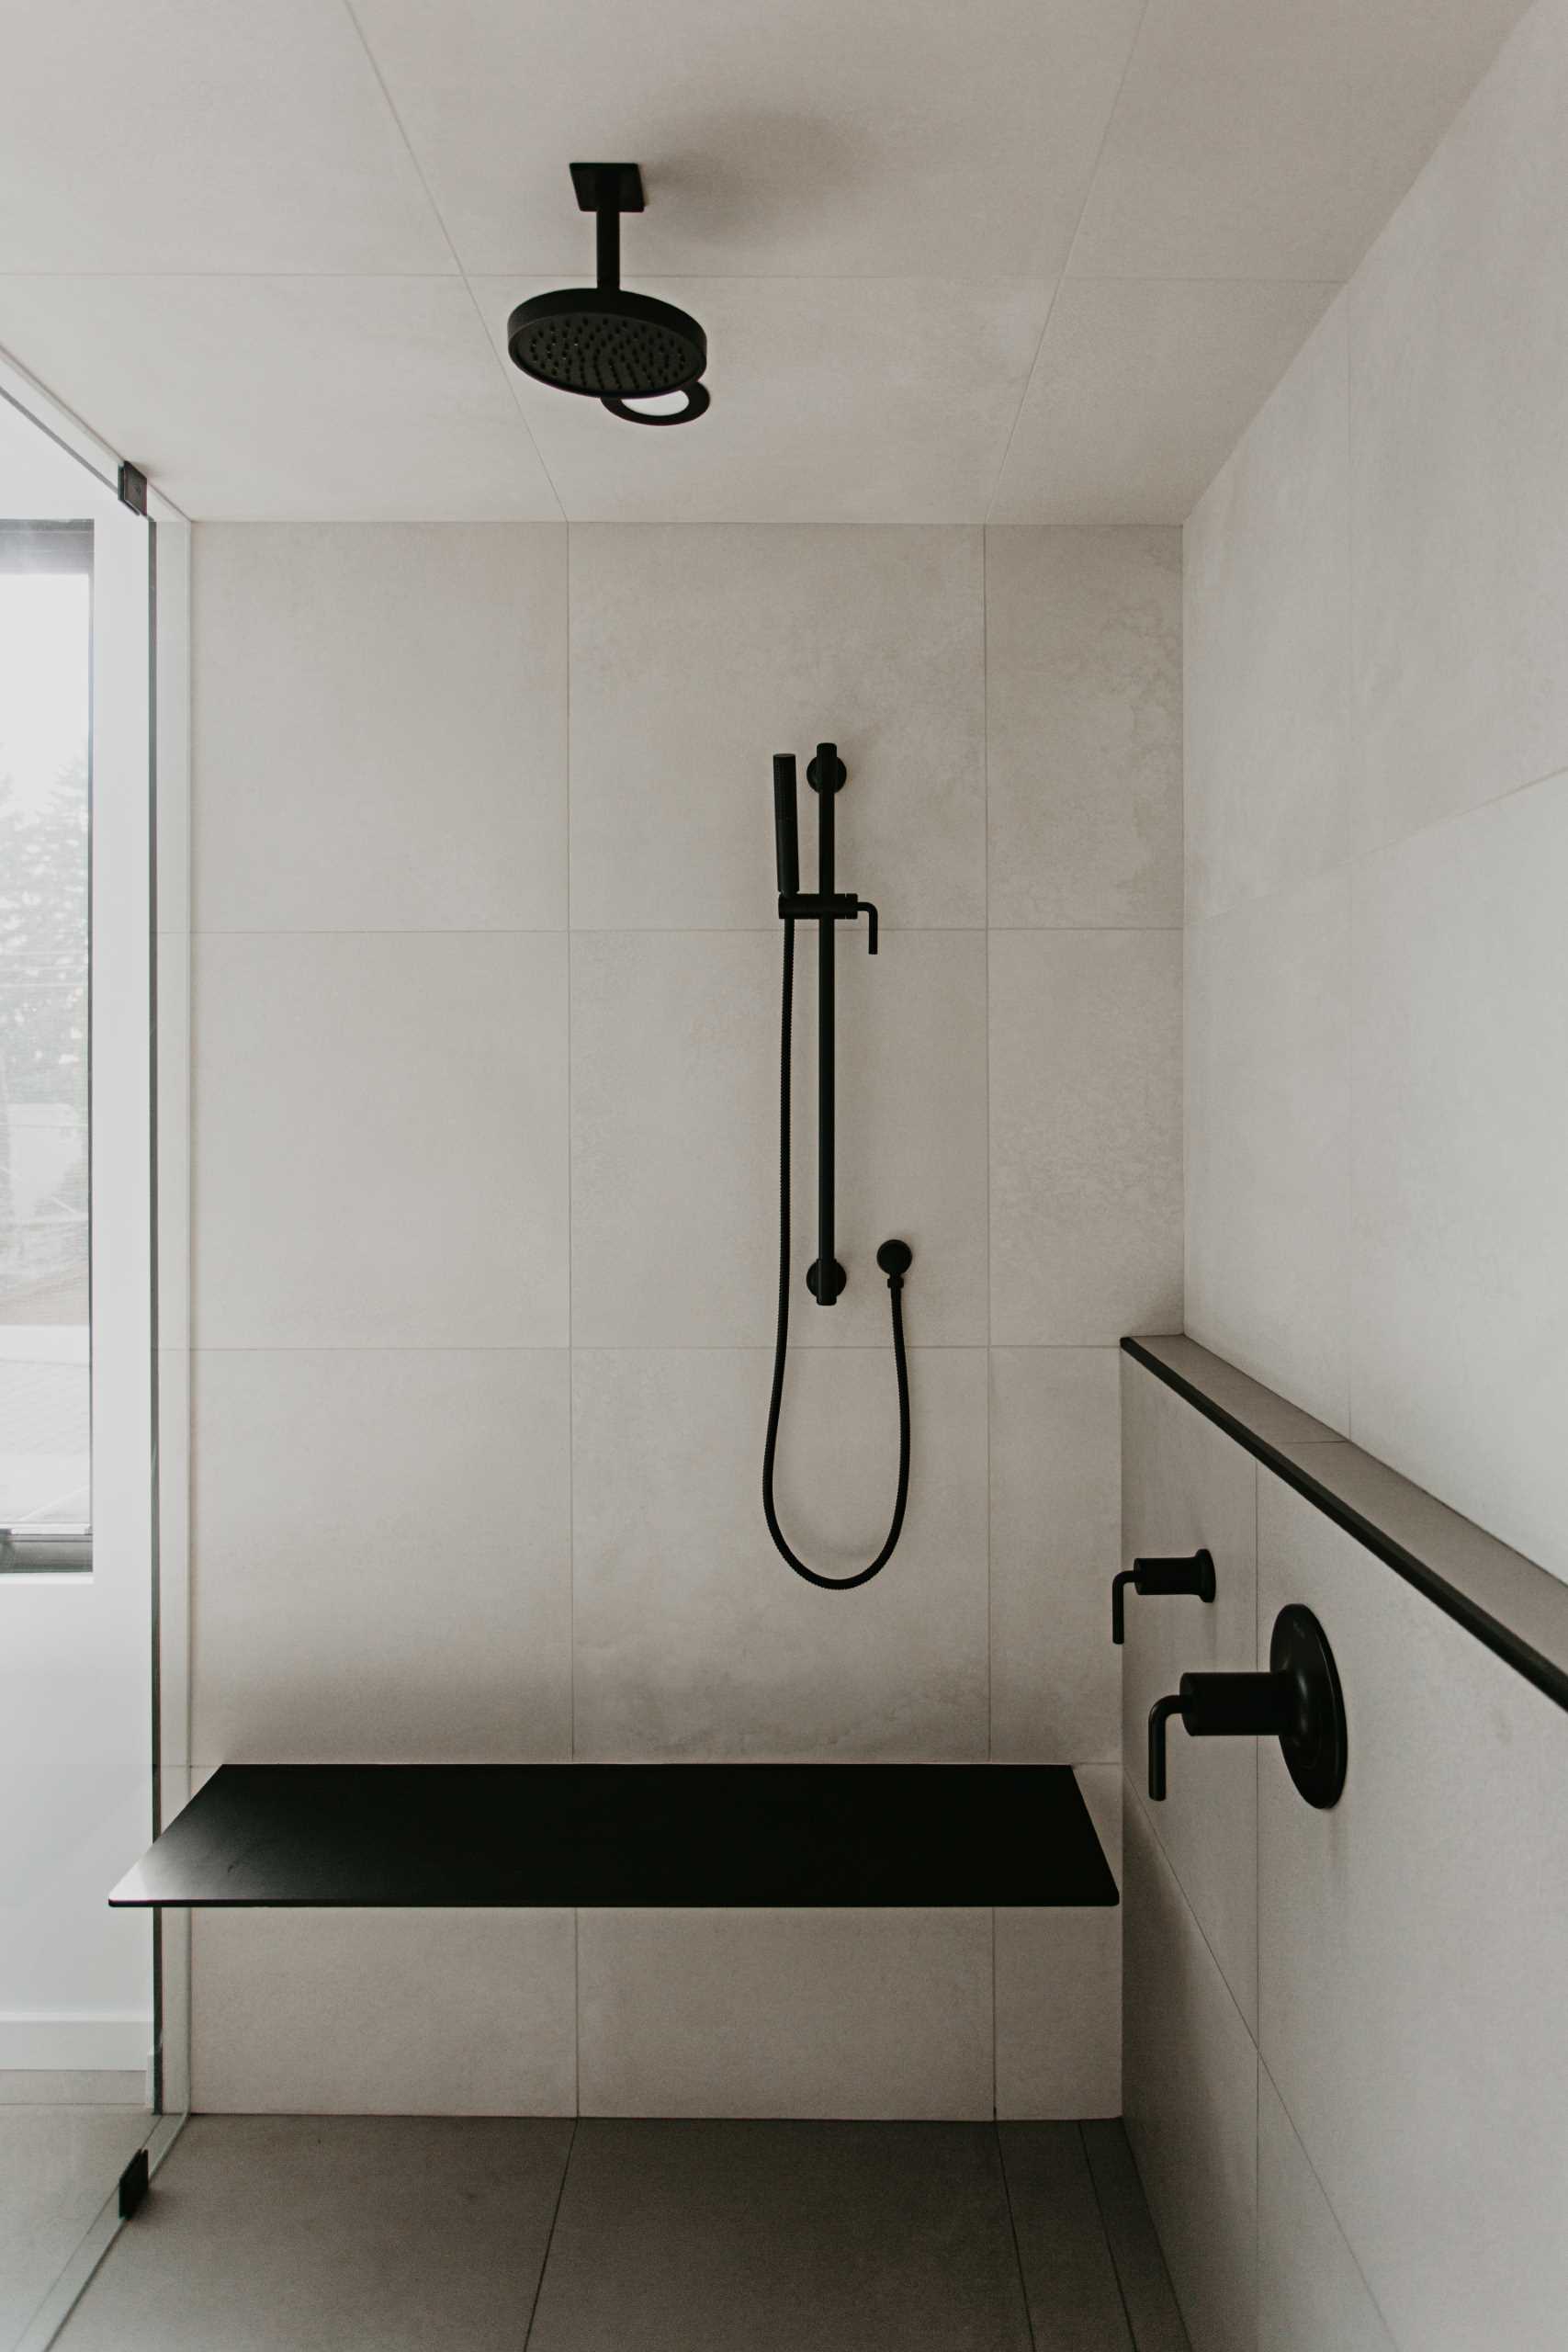 A walk-in shower with black details, a bench, and a shelf.